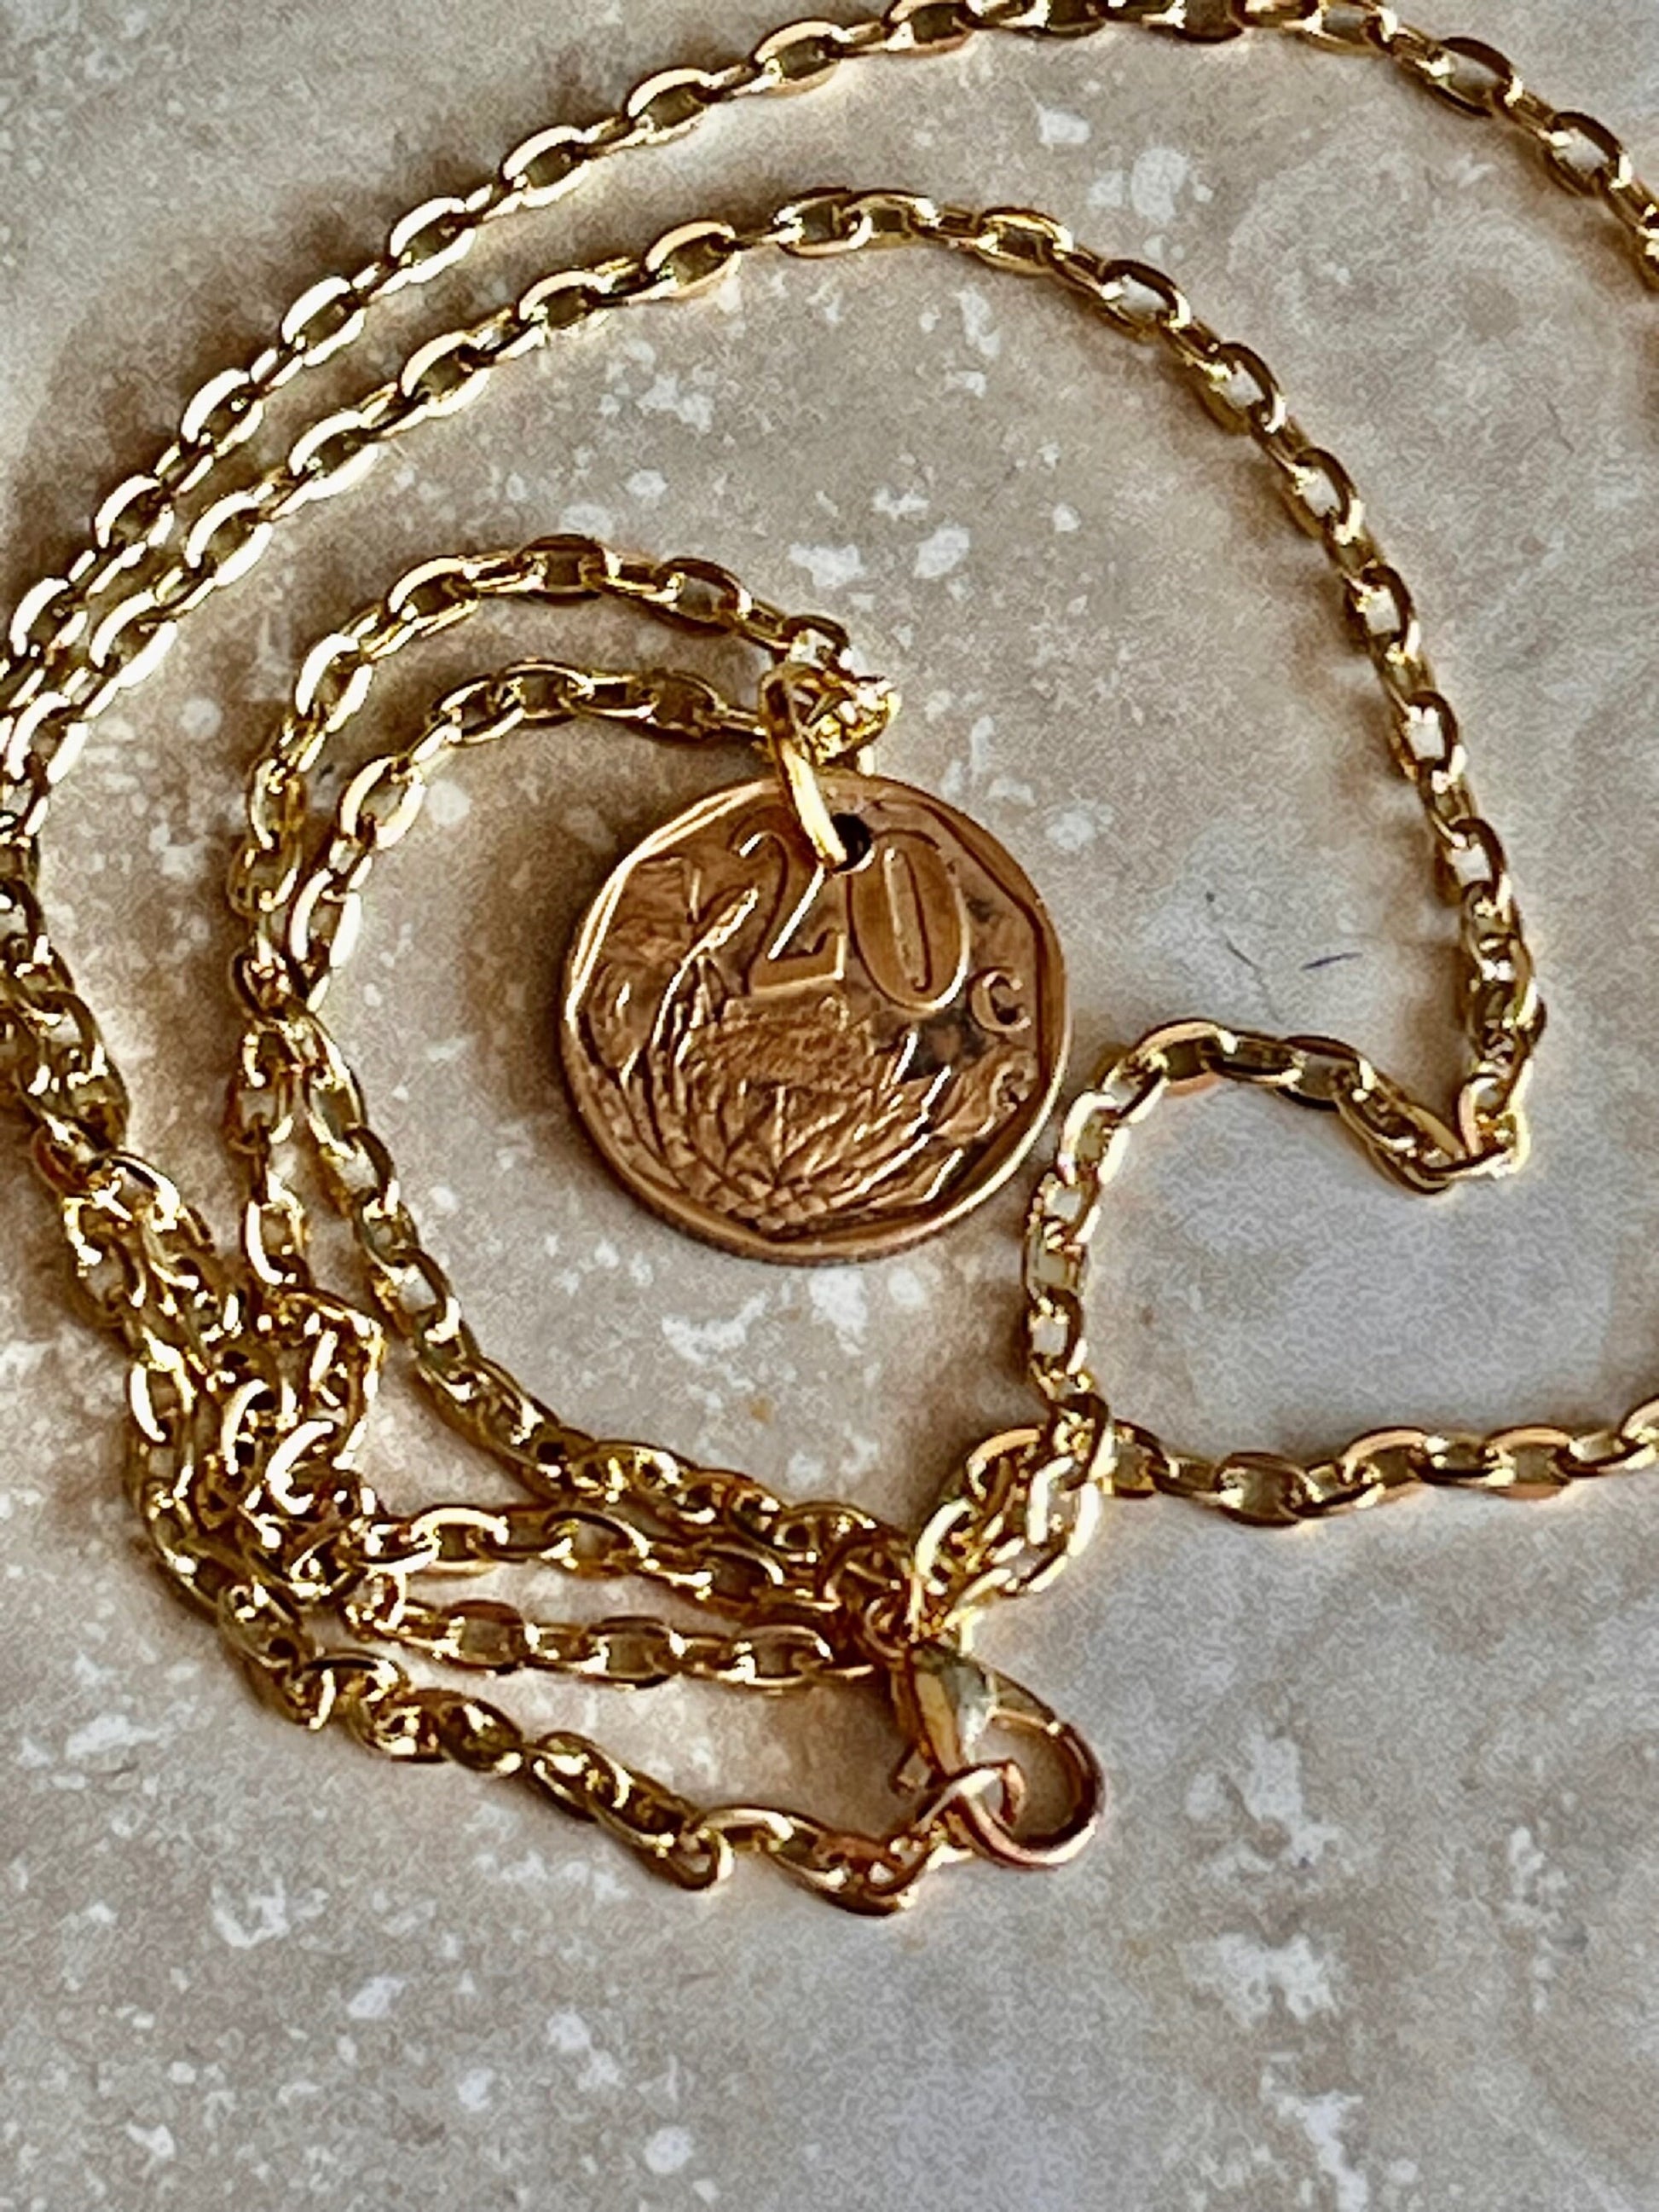 South Africa Coin Pendant African 20 Cents Personal Necklace Old Vintage Handmade Jewelry Gift Friend Charm For Him Her World Coin Collector